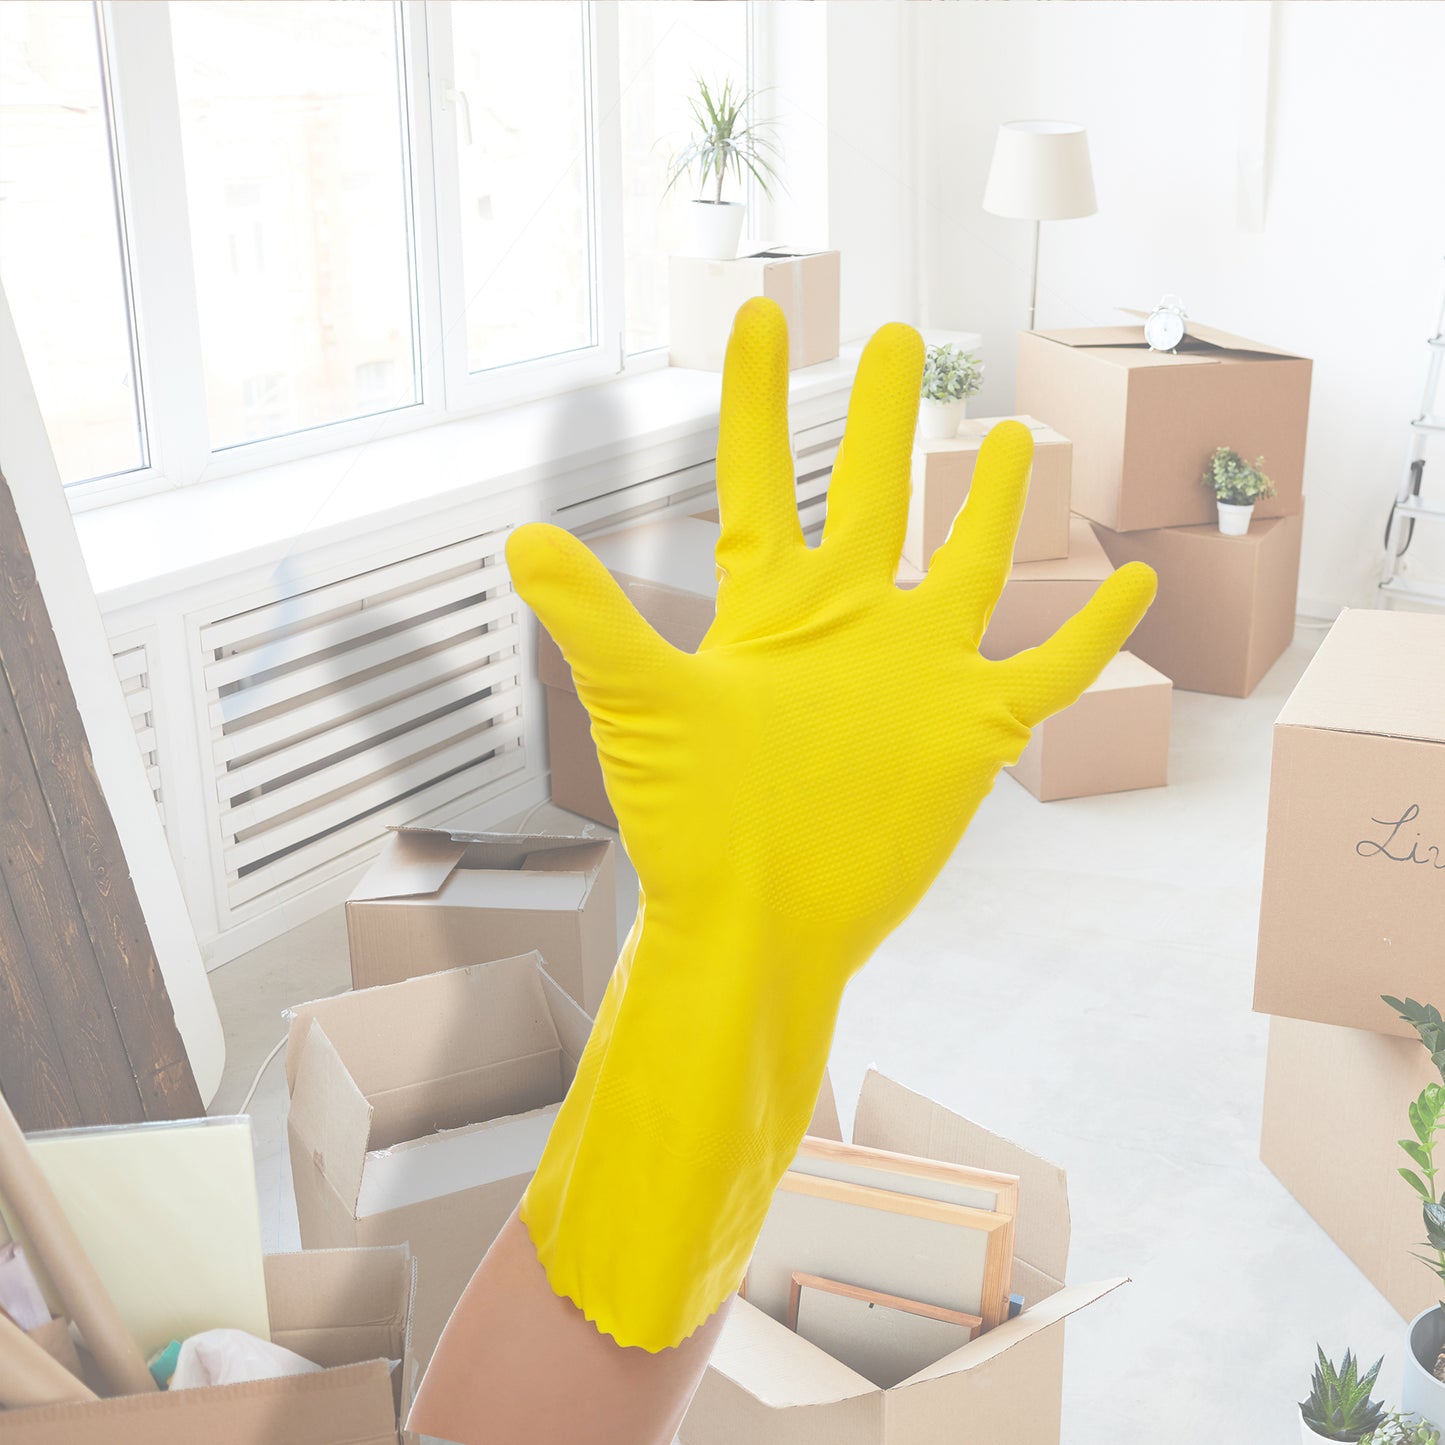 Move In/Move Out Cleaning for your House - Los Angeles